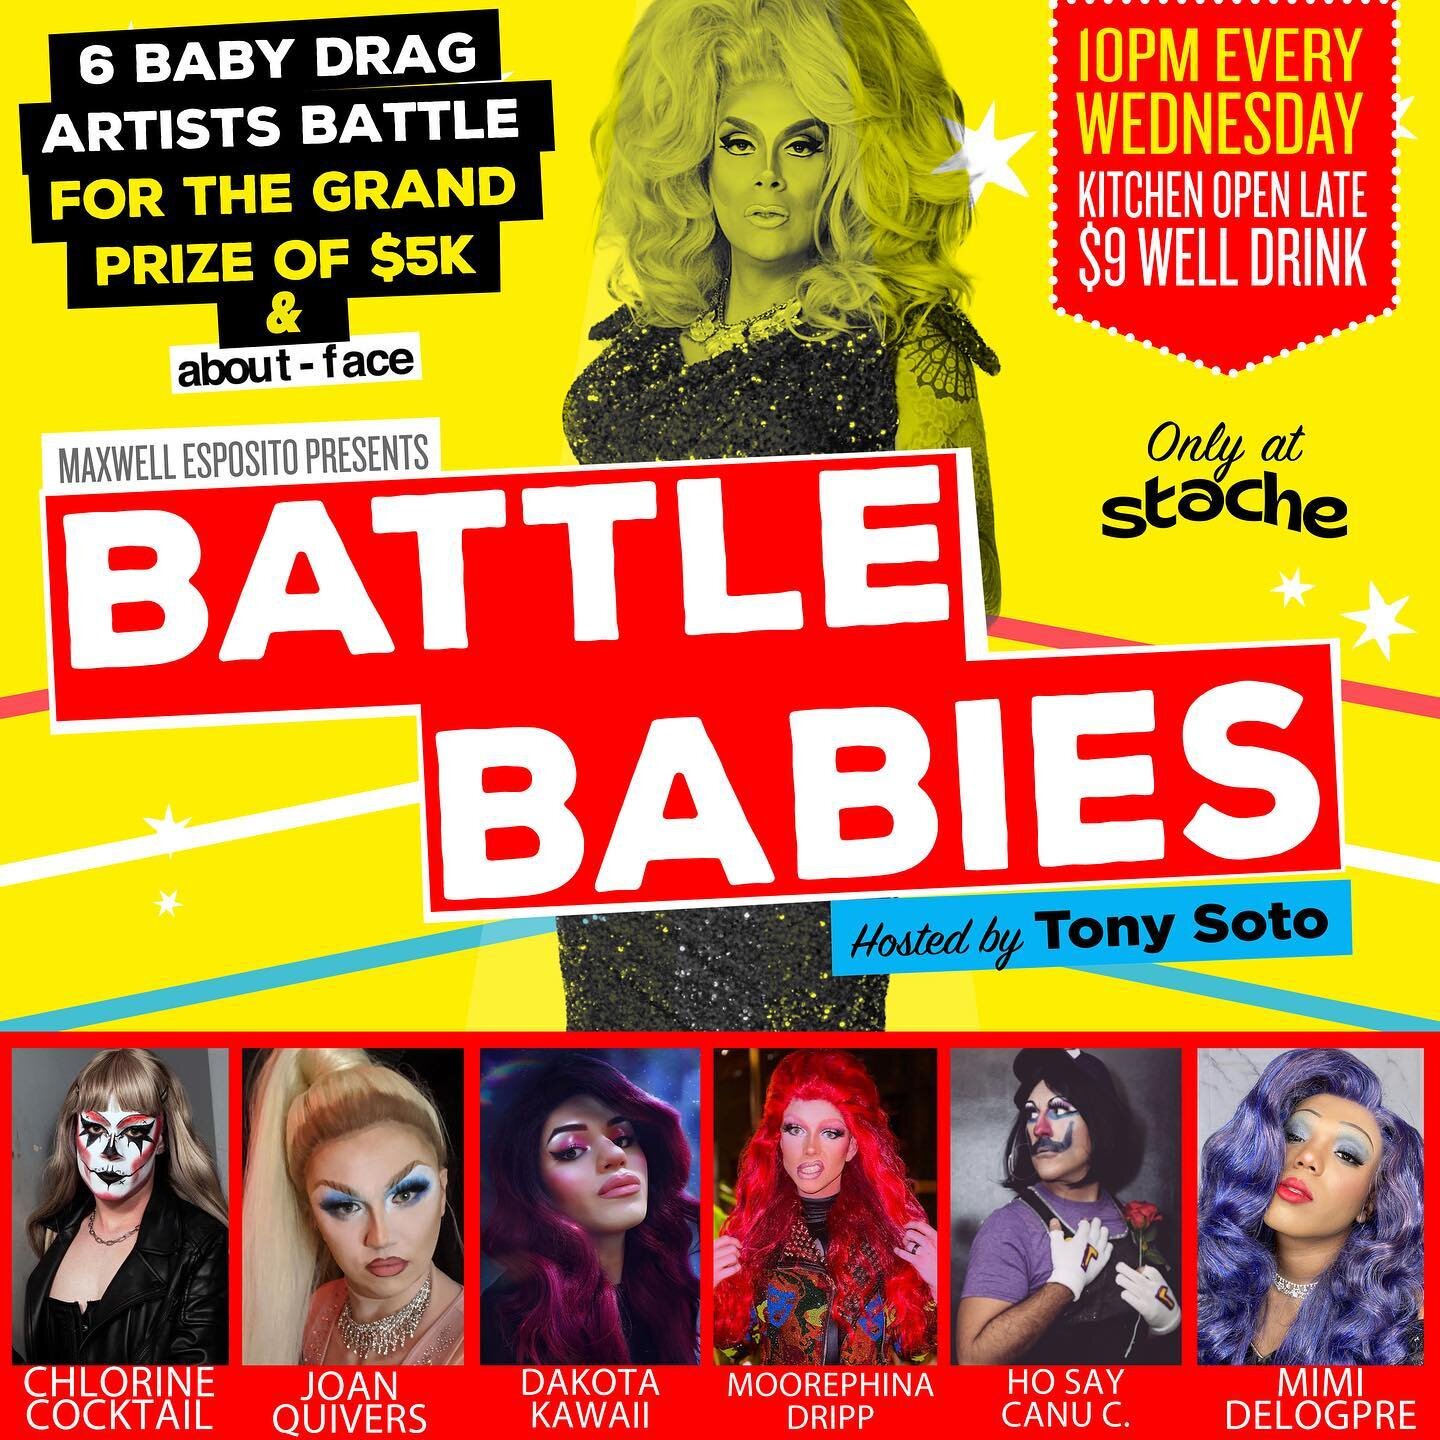 Wednesday we are back with another installment of #BattleBabies at @stacheweho! Join your host @thetonysotoshow for a fabulous night of drag! Show starts at 10! Only 1 performer moves on to the semi finals and YOU decide! See you all there!